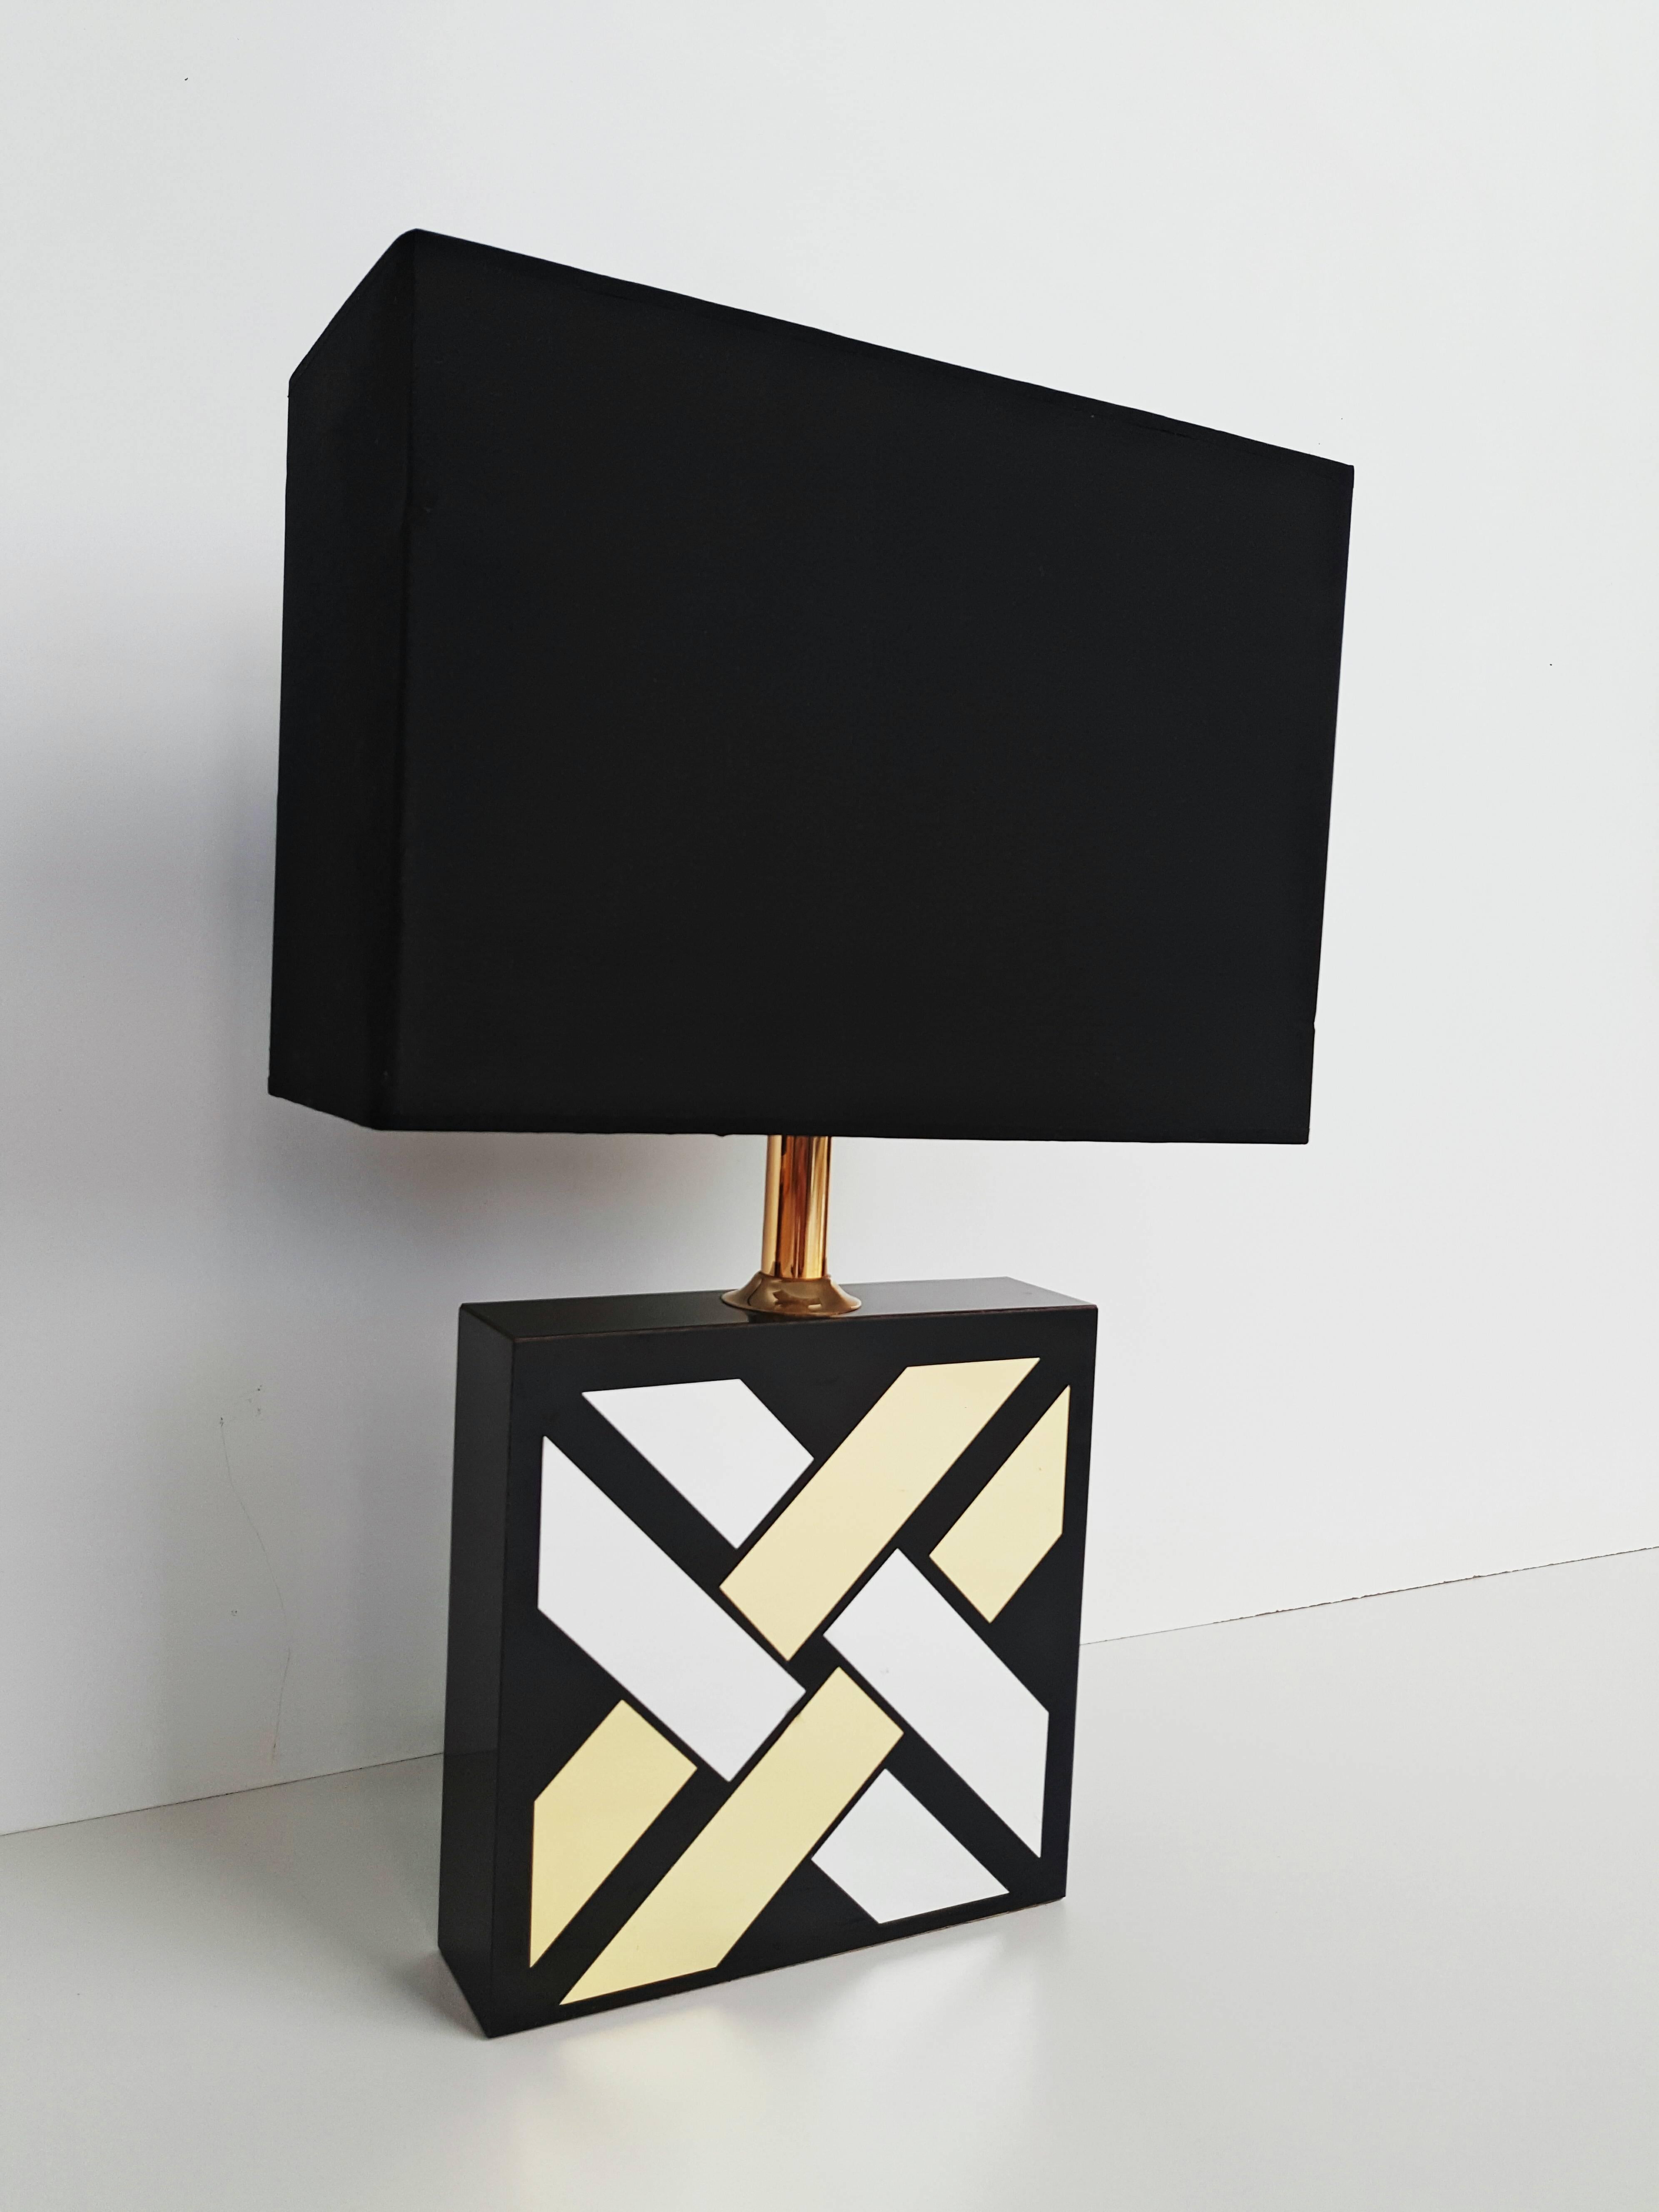 Beautiful Willy Rizzo table lamp, manufactured in 1970 in black lacquered wood, chrome polished and brass. Lampshade included.